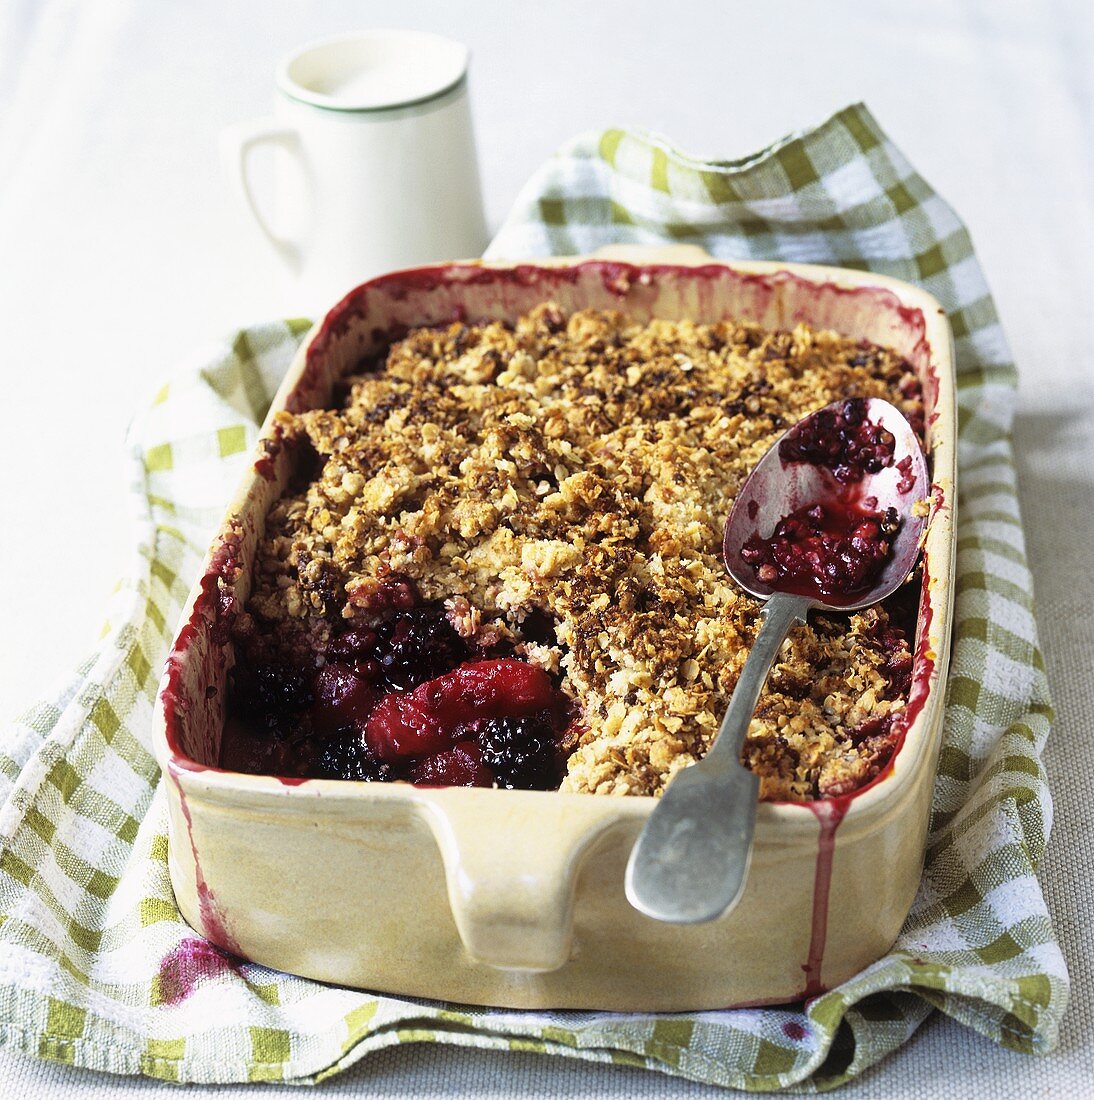 Apple and blackberry crumble in a baking dish, jug of cream